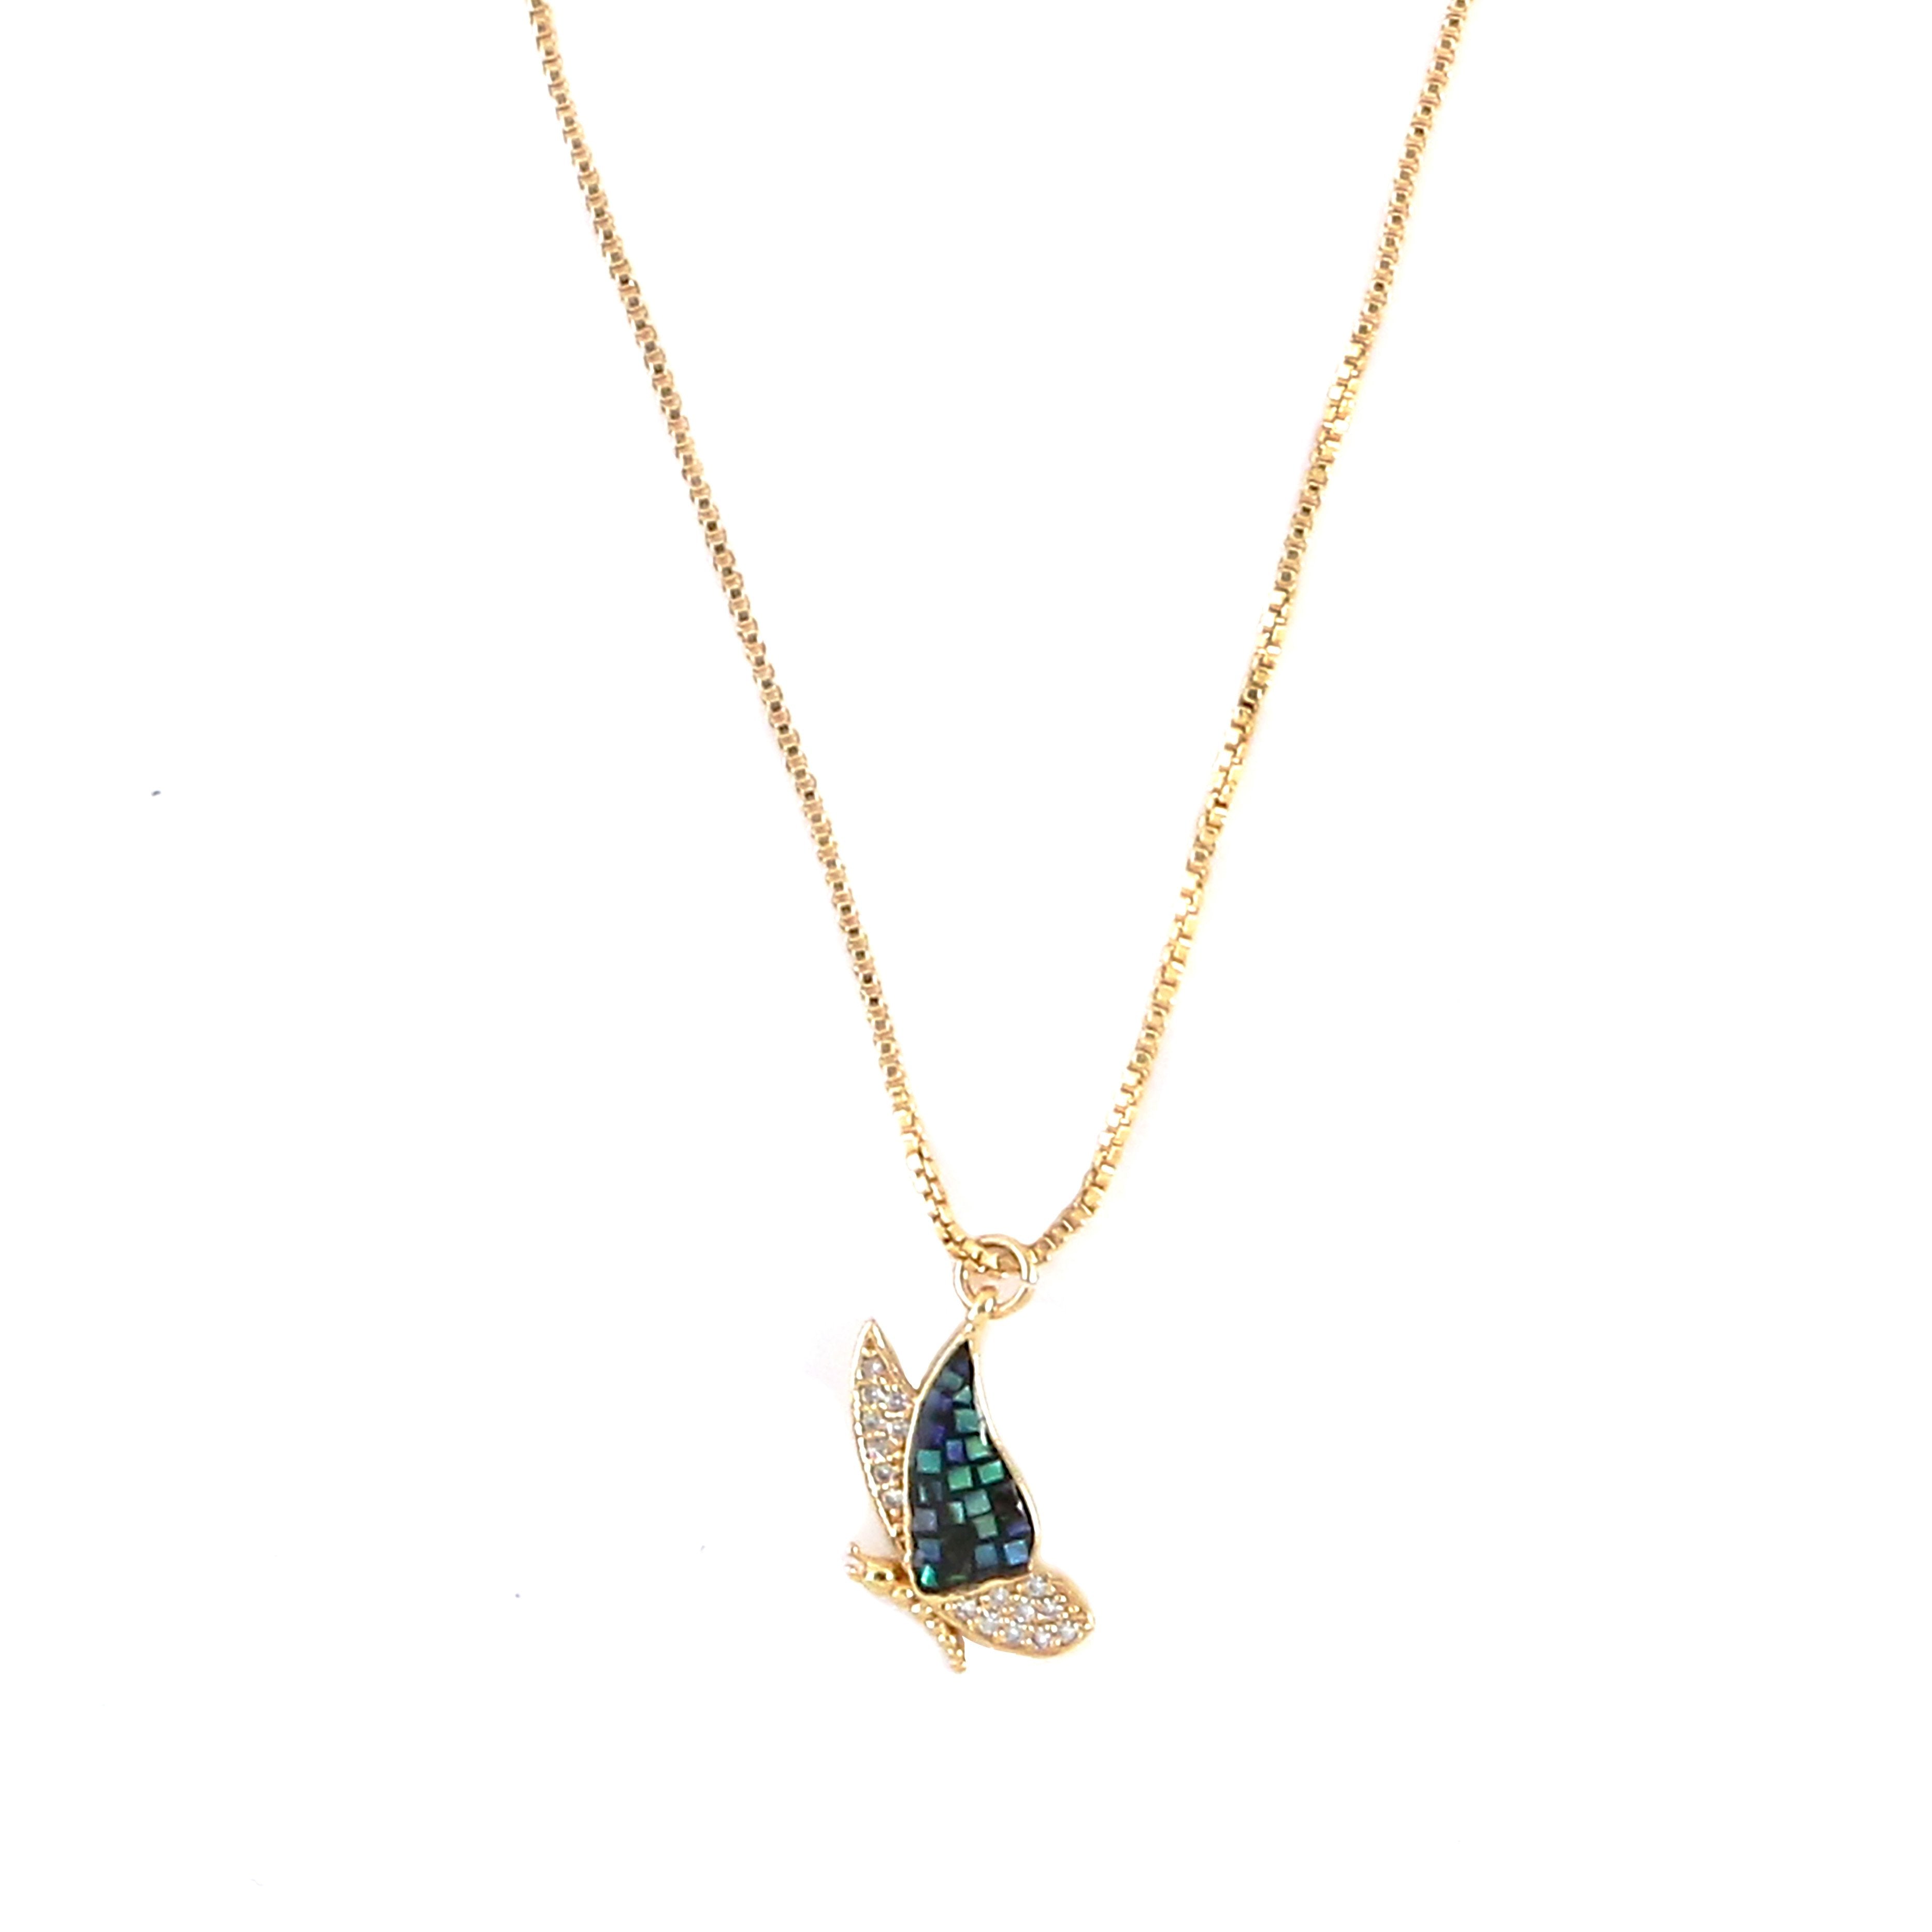 The Jewel Factor By Priti Mandhana - Dove Necklace